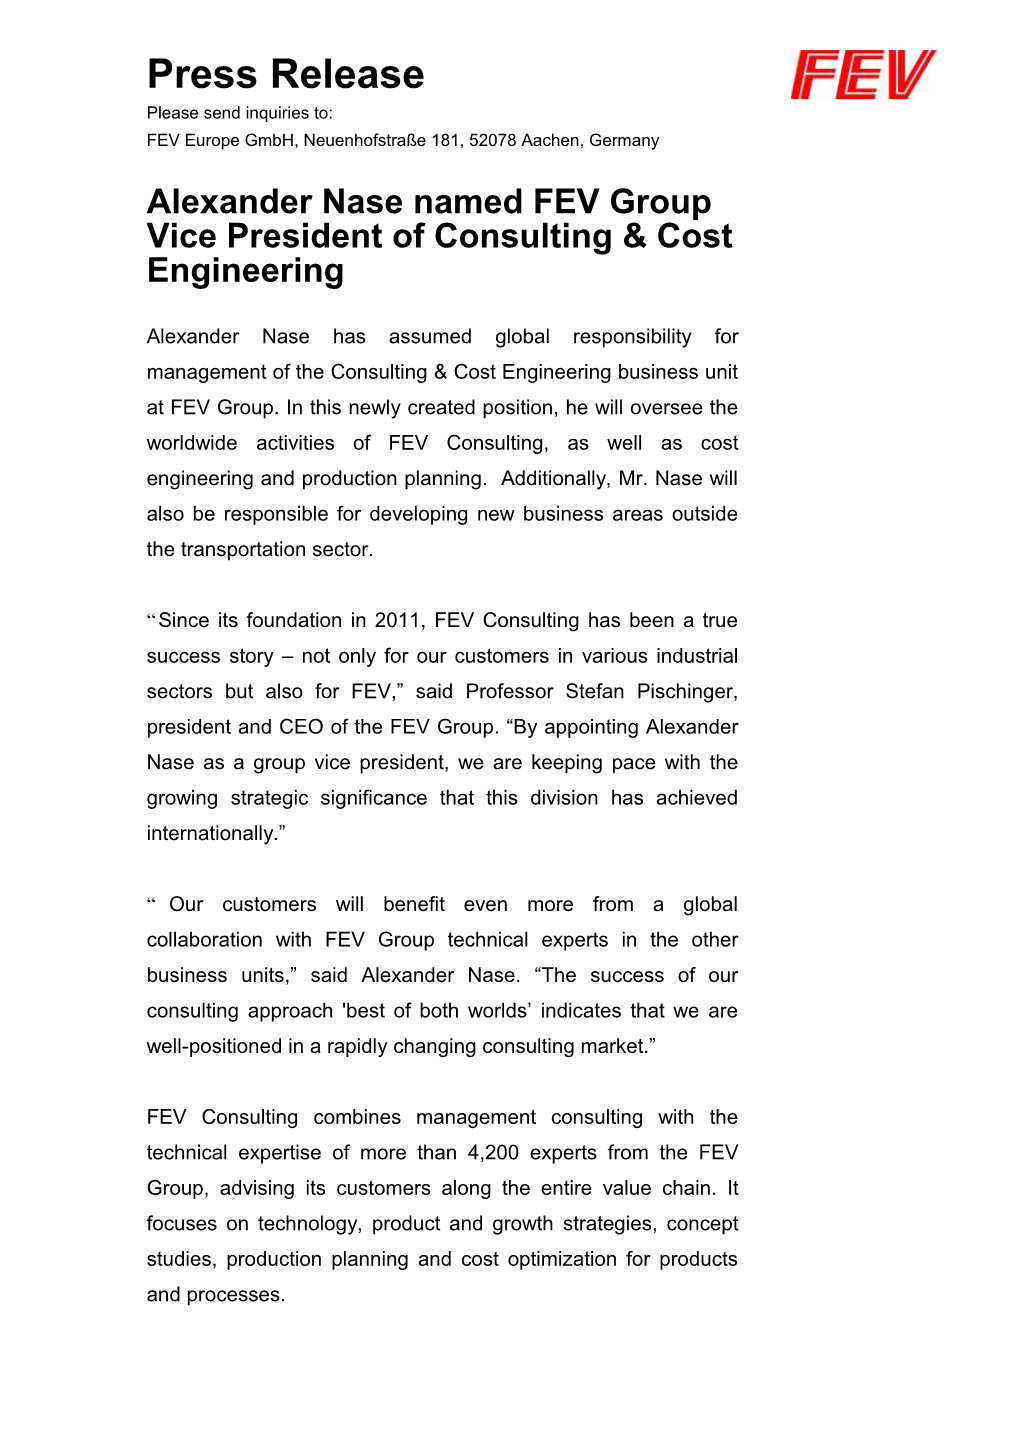 Alexander Nase Named FEV Group Vice President of Consulting & Cost Engineering